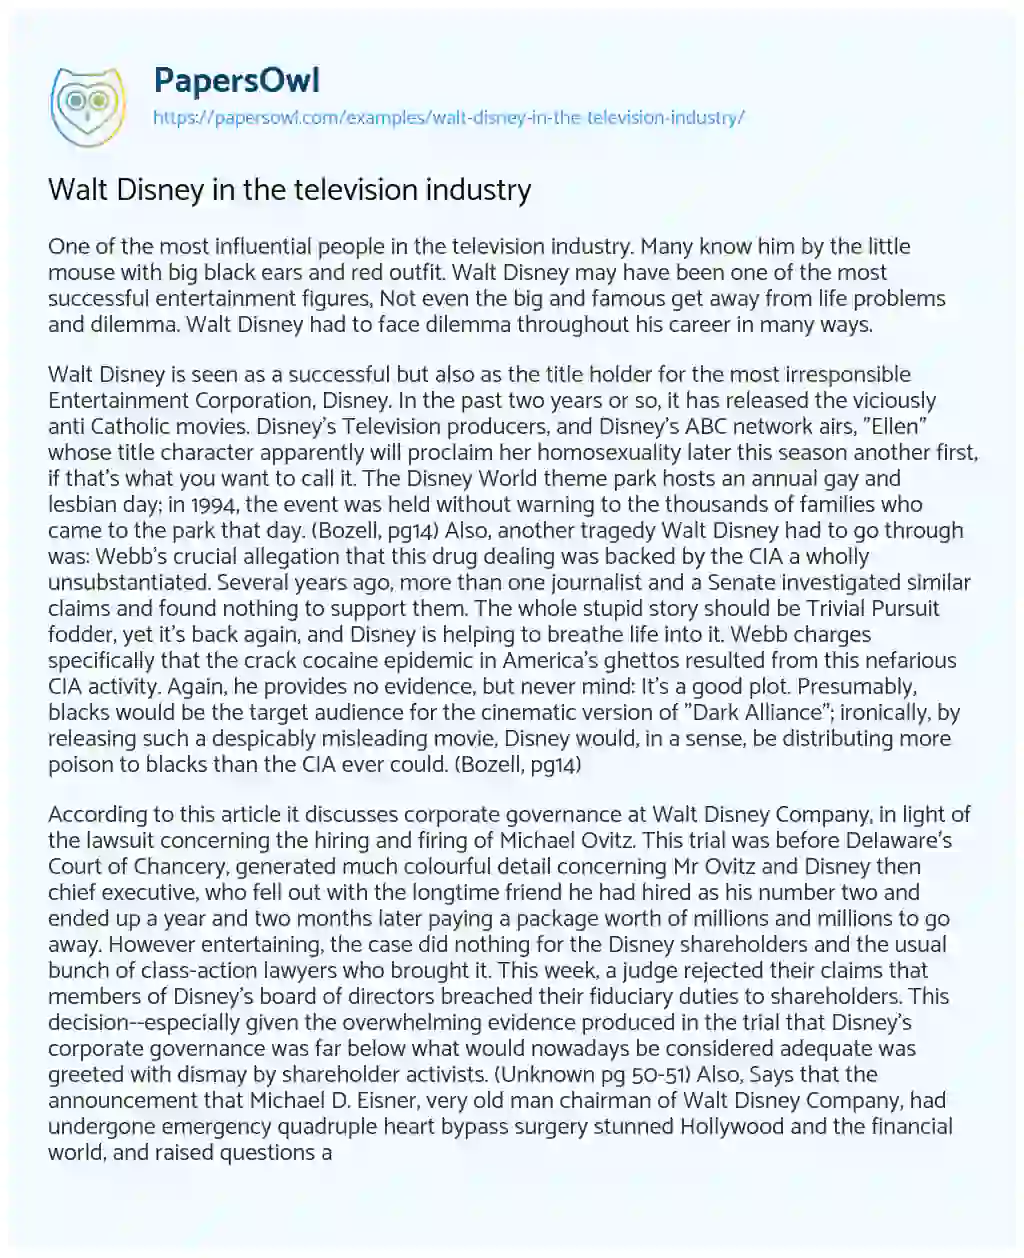 Walt Disney in the Television Industry essay